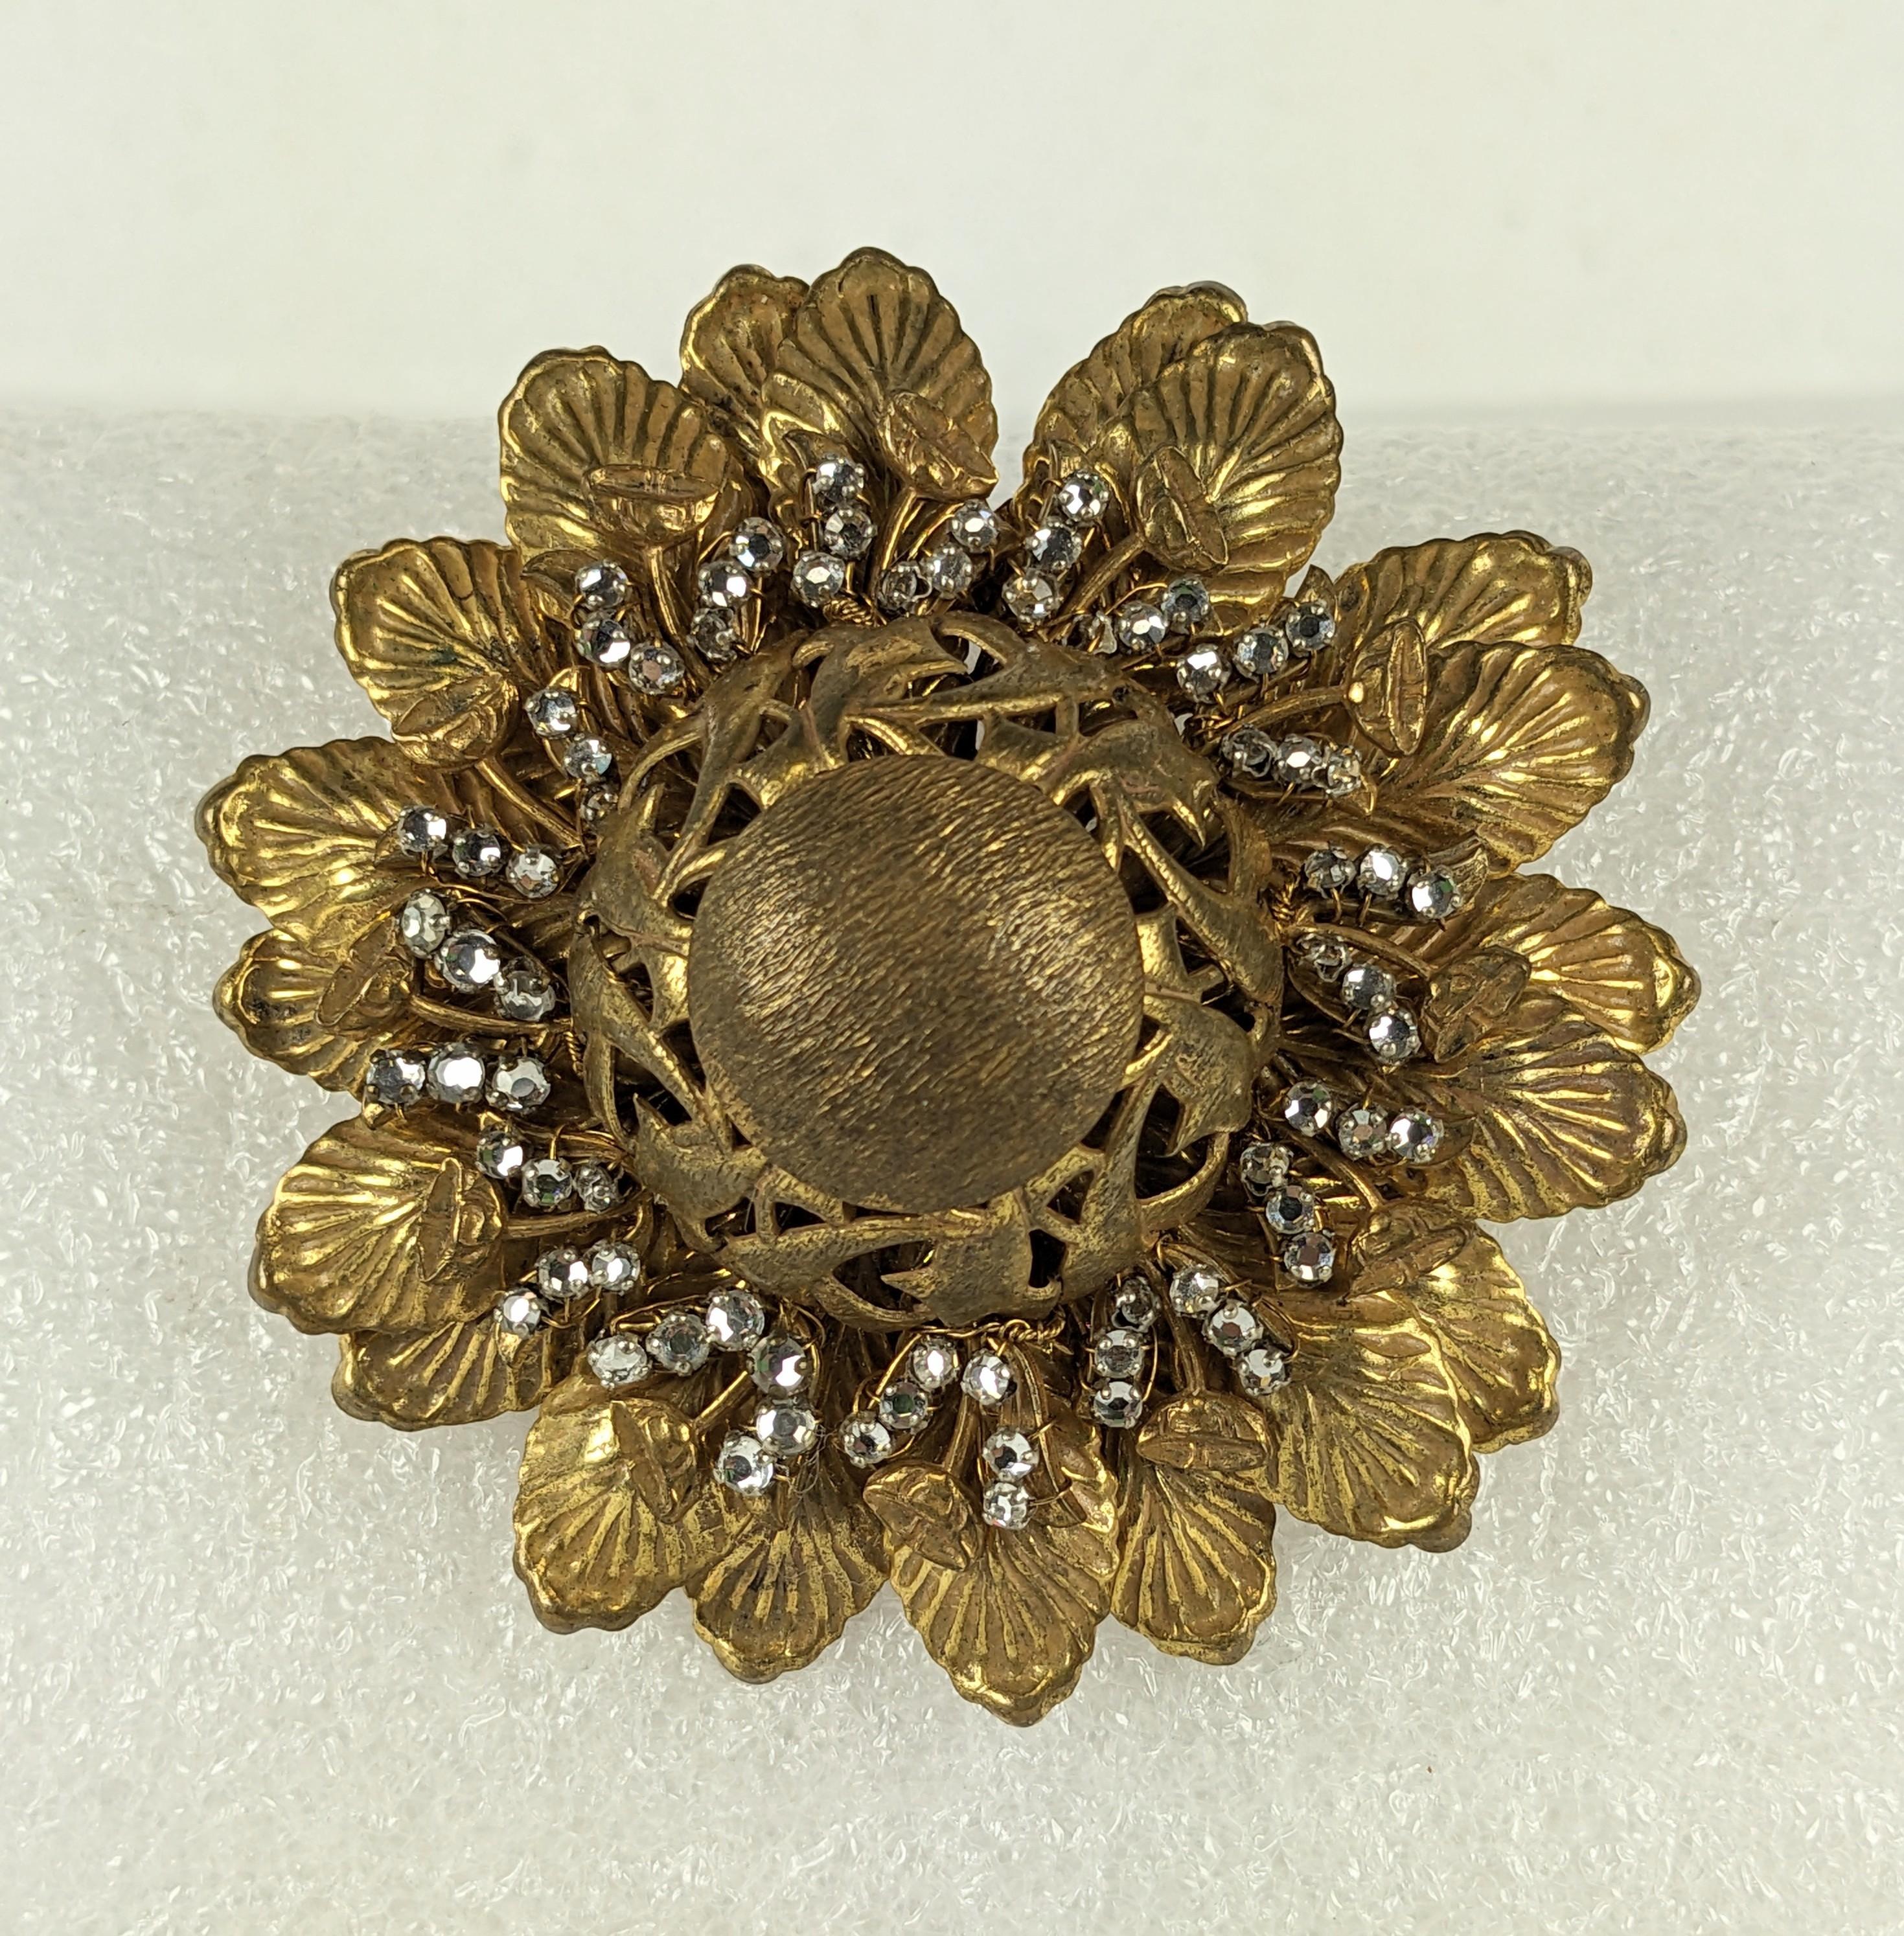 Large Miriam Haskell Gilt Flower with Rose Montees from the 1940's. Gilt leaves and buds are sewn onto a filigree base with sewn crystal accents. 1940's USA. Signed. 2.75